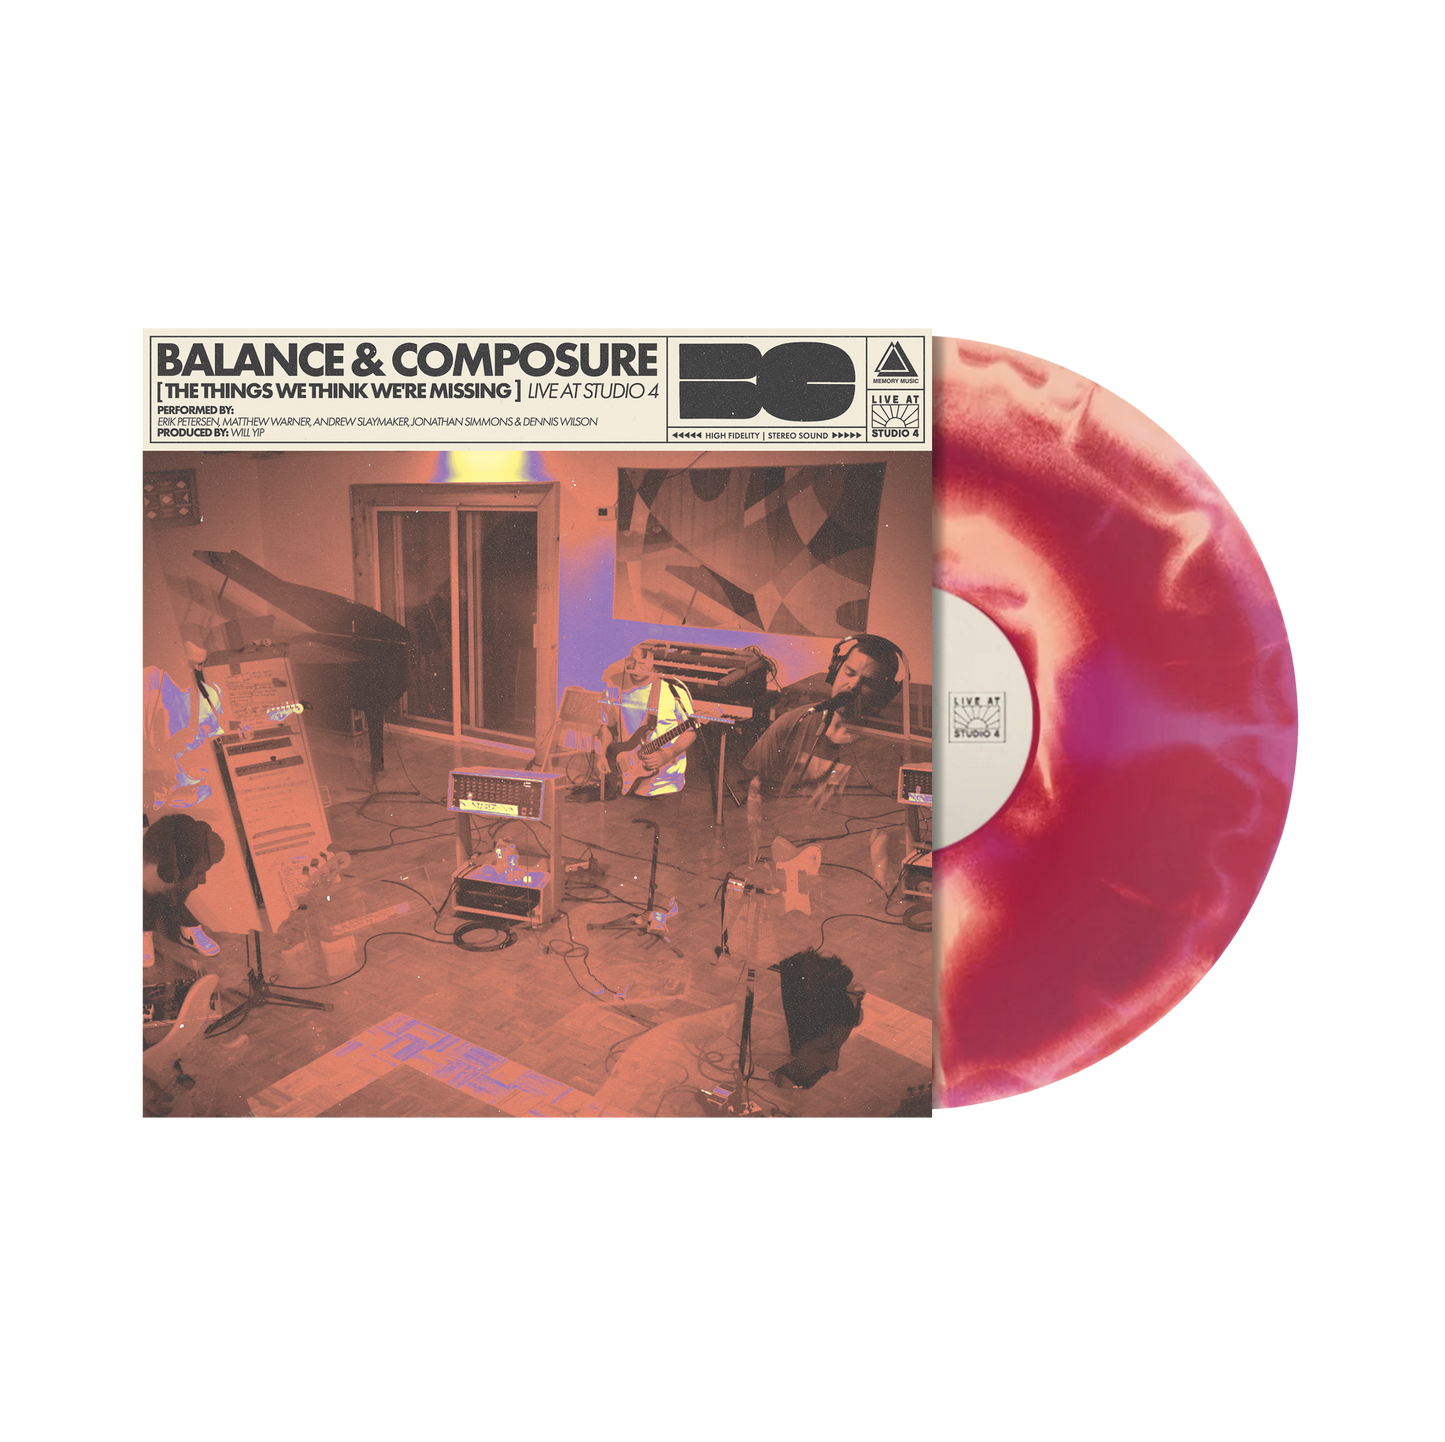 Balance & Composure  "The Things We Think We're Missing Live at Studio 4" LP